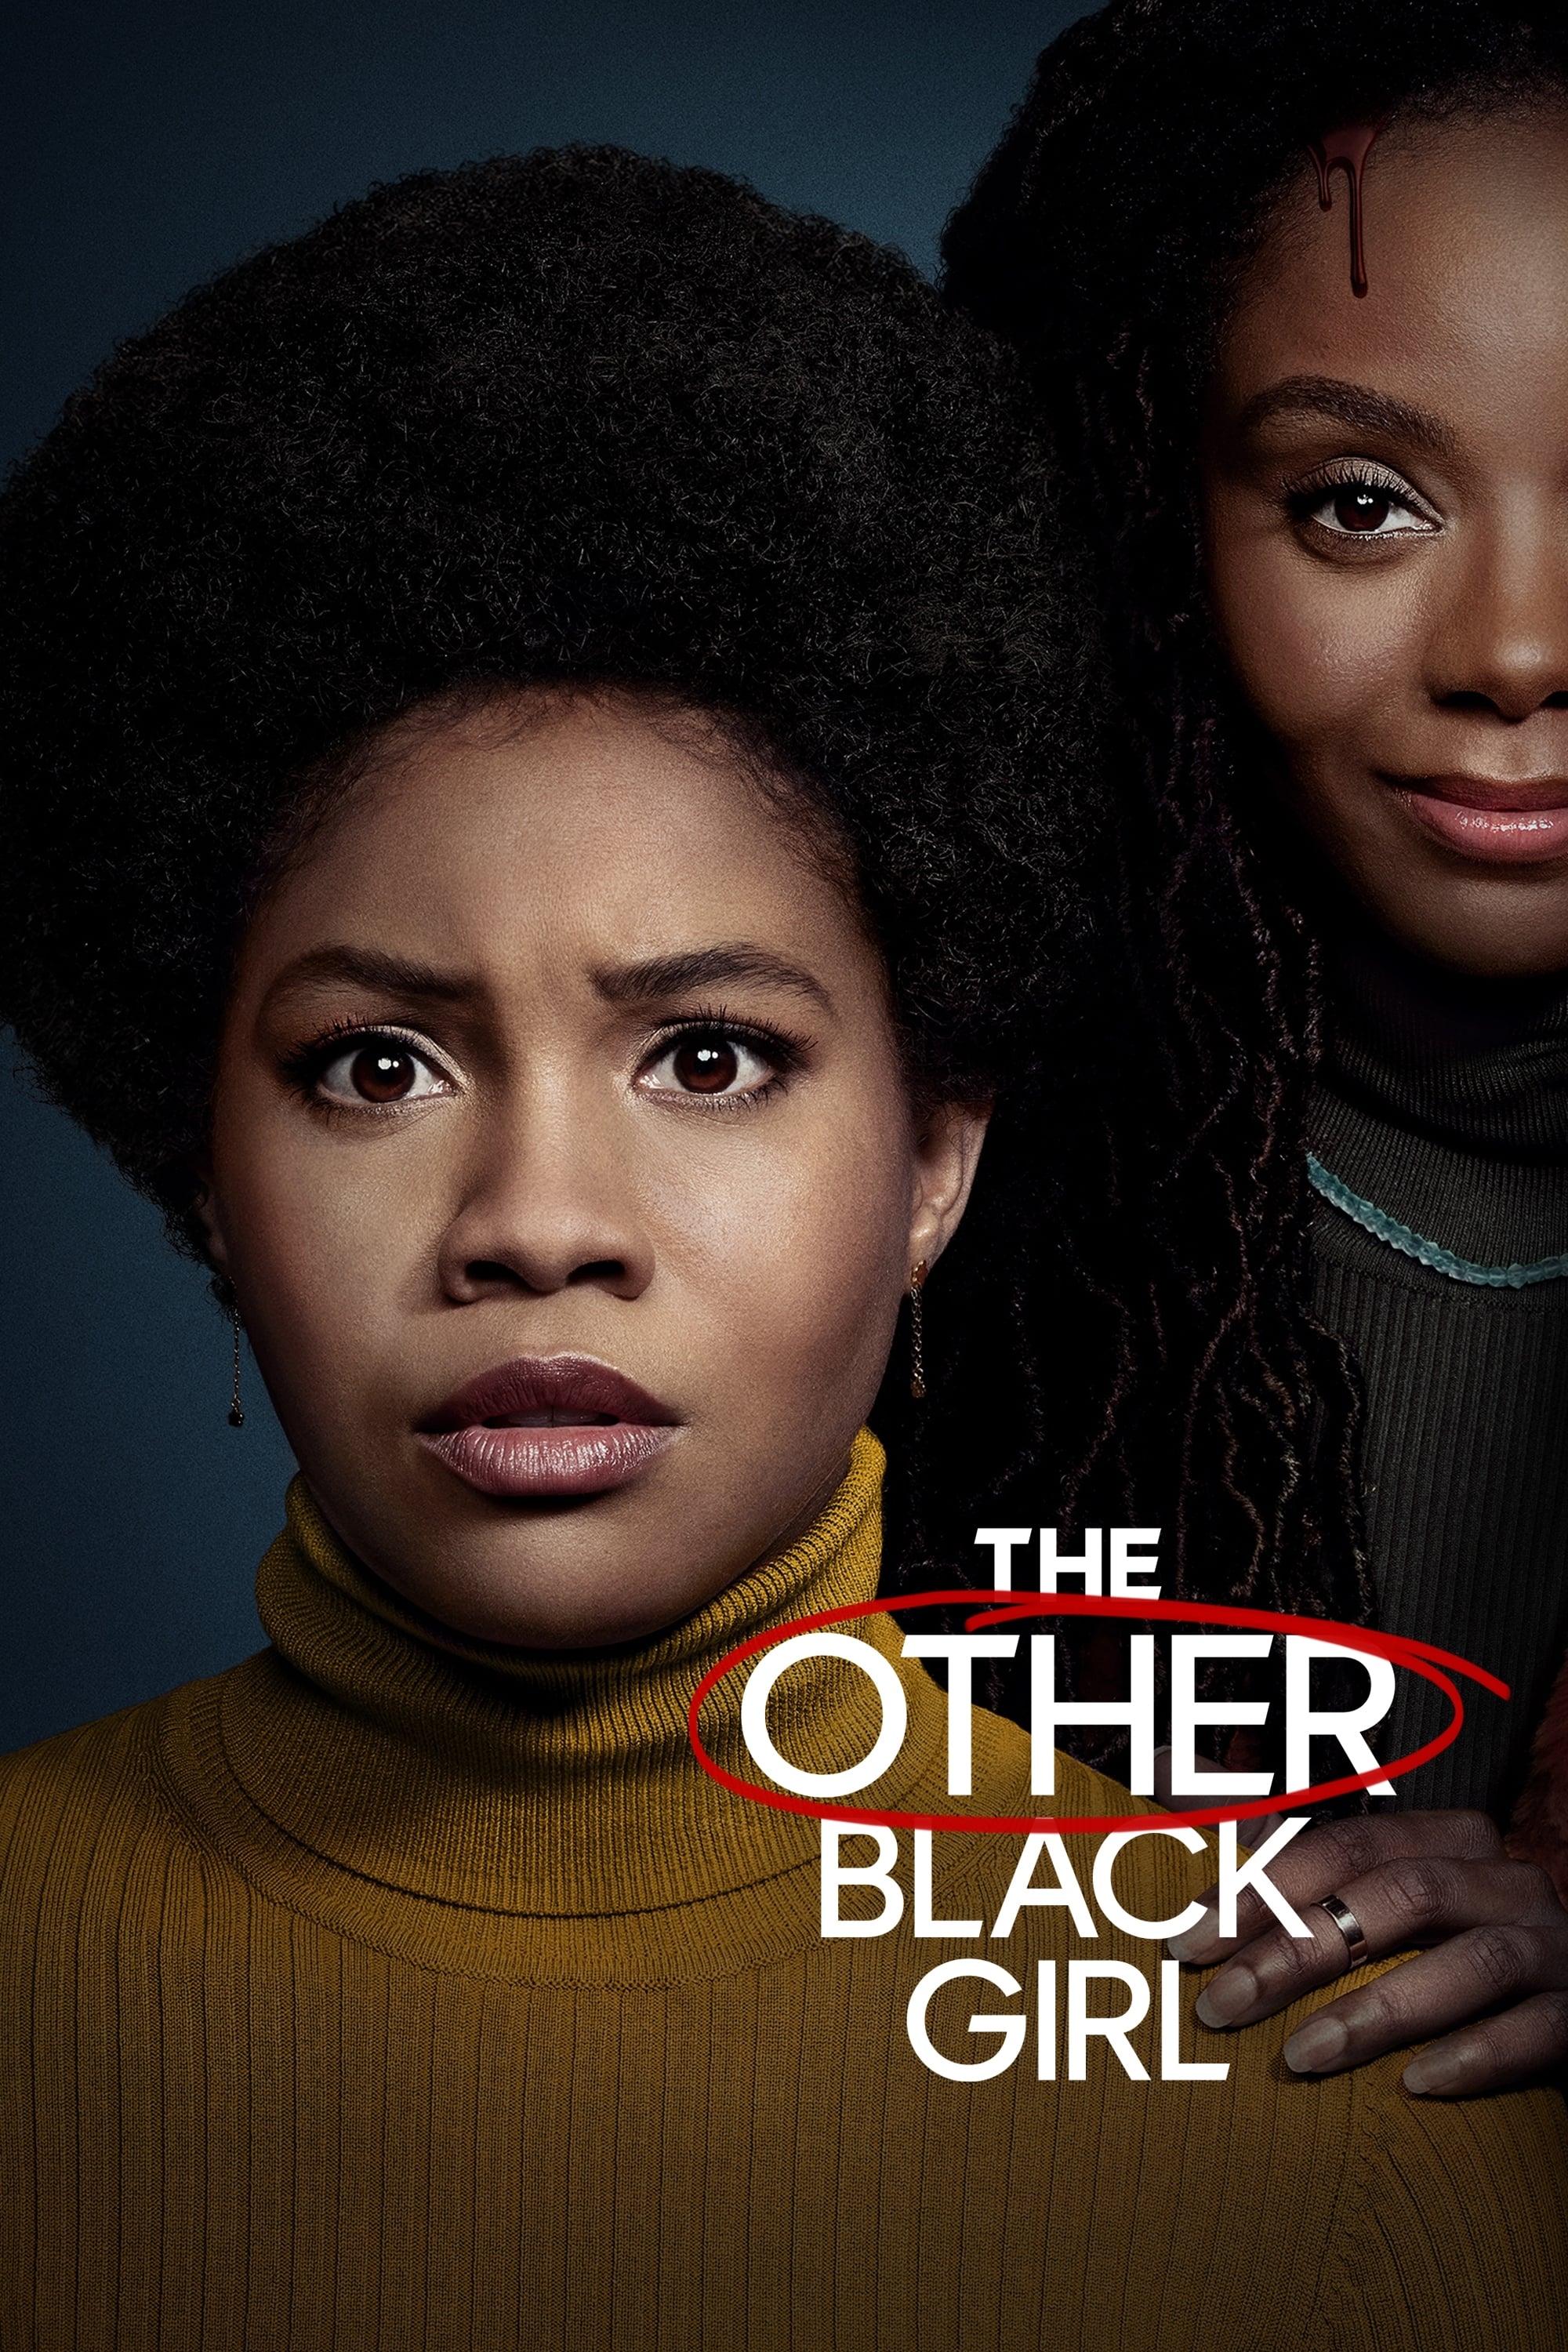 The Other Black Girl TV Shows About Based On Novel Or Book